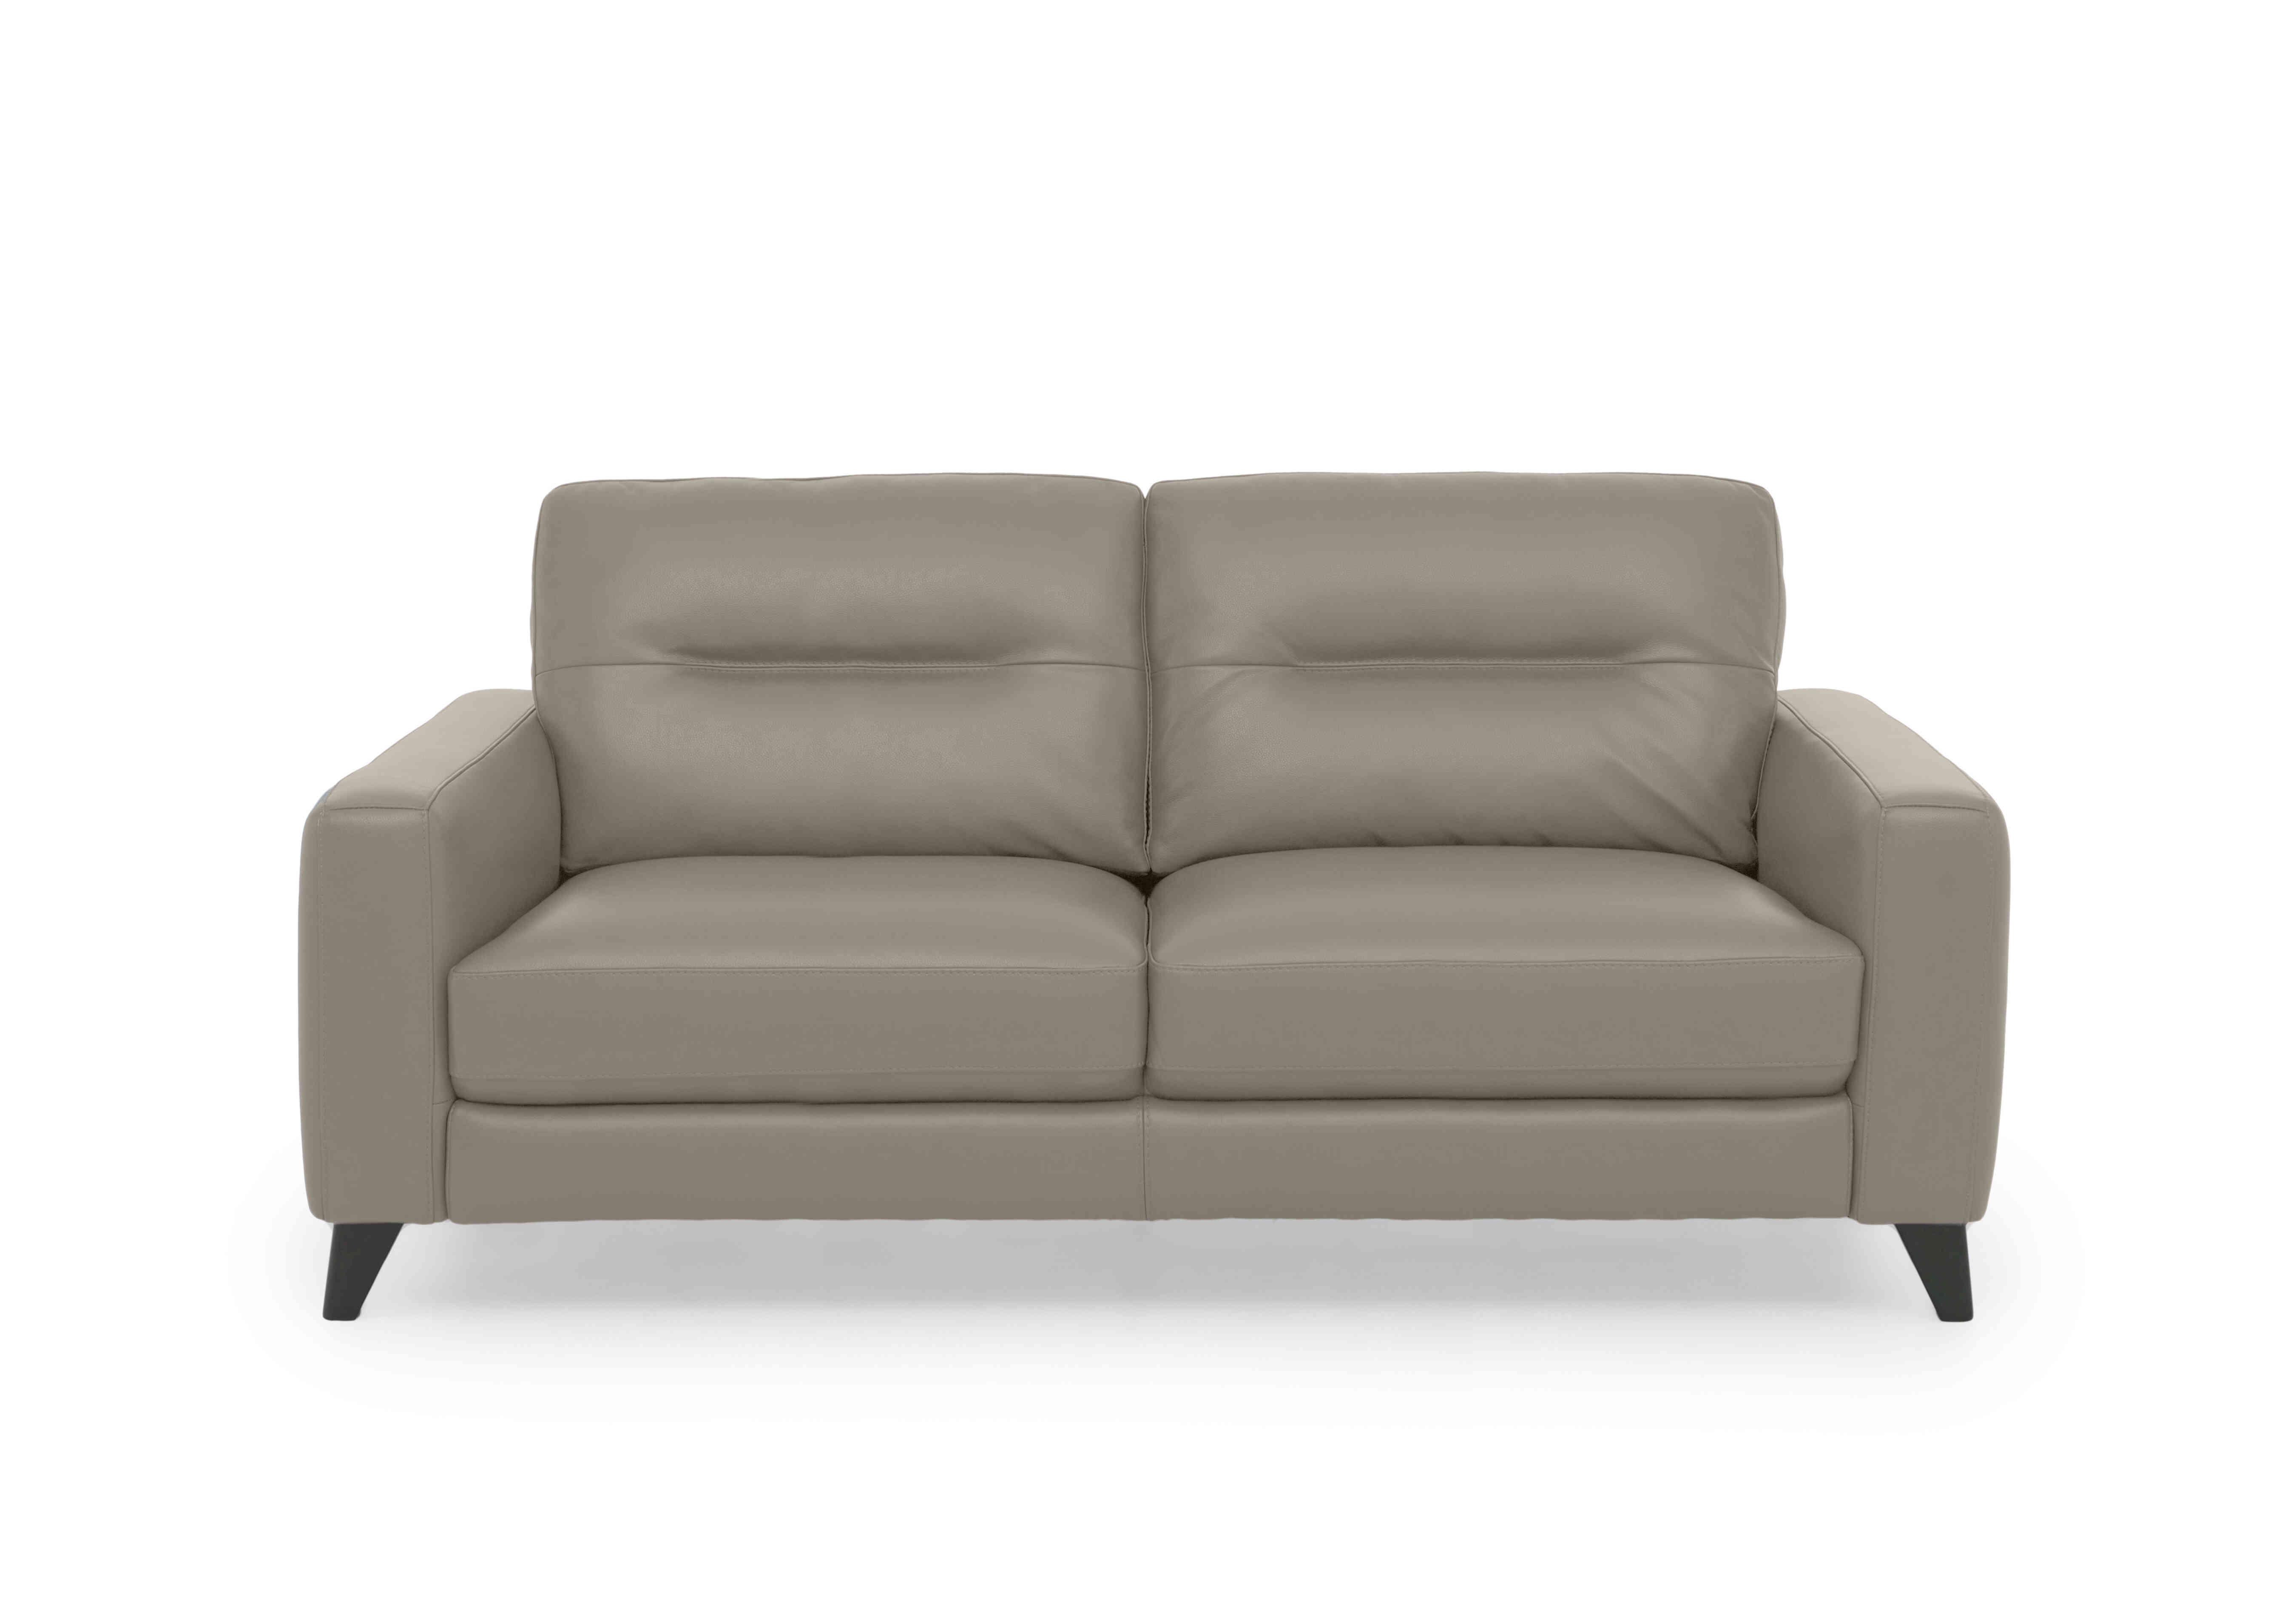 Jules 3 Seater Leather Sofa in An-946b Silver Grey on Furniture Village